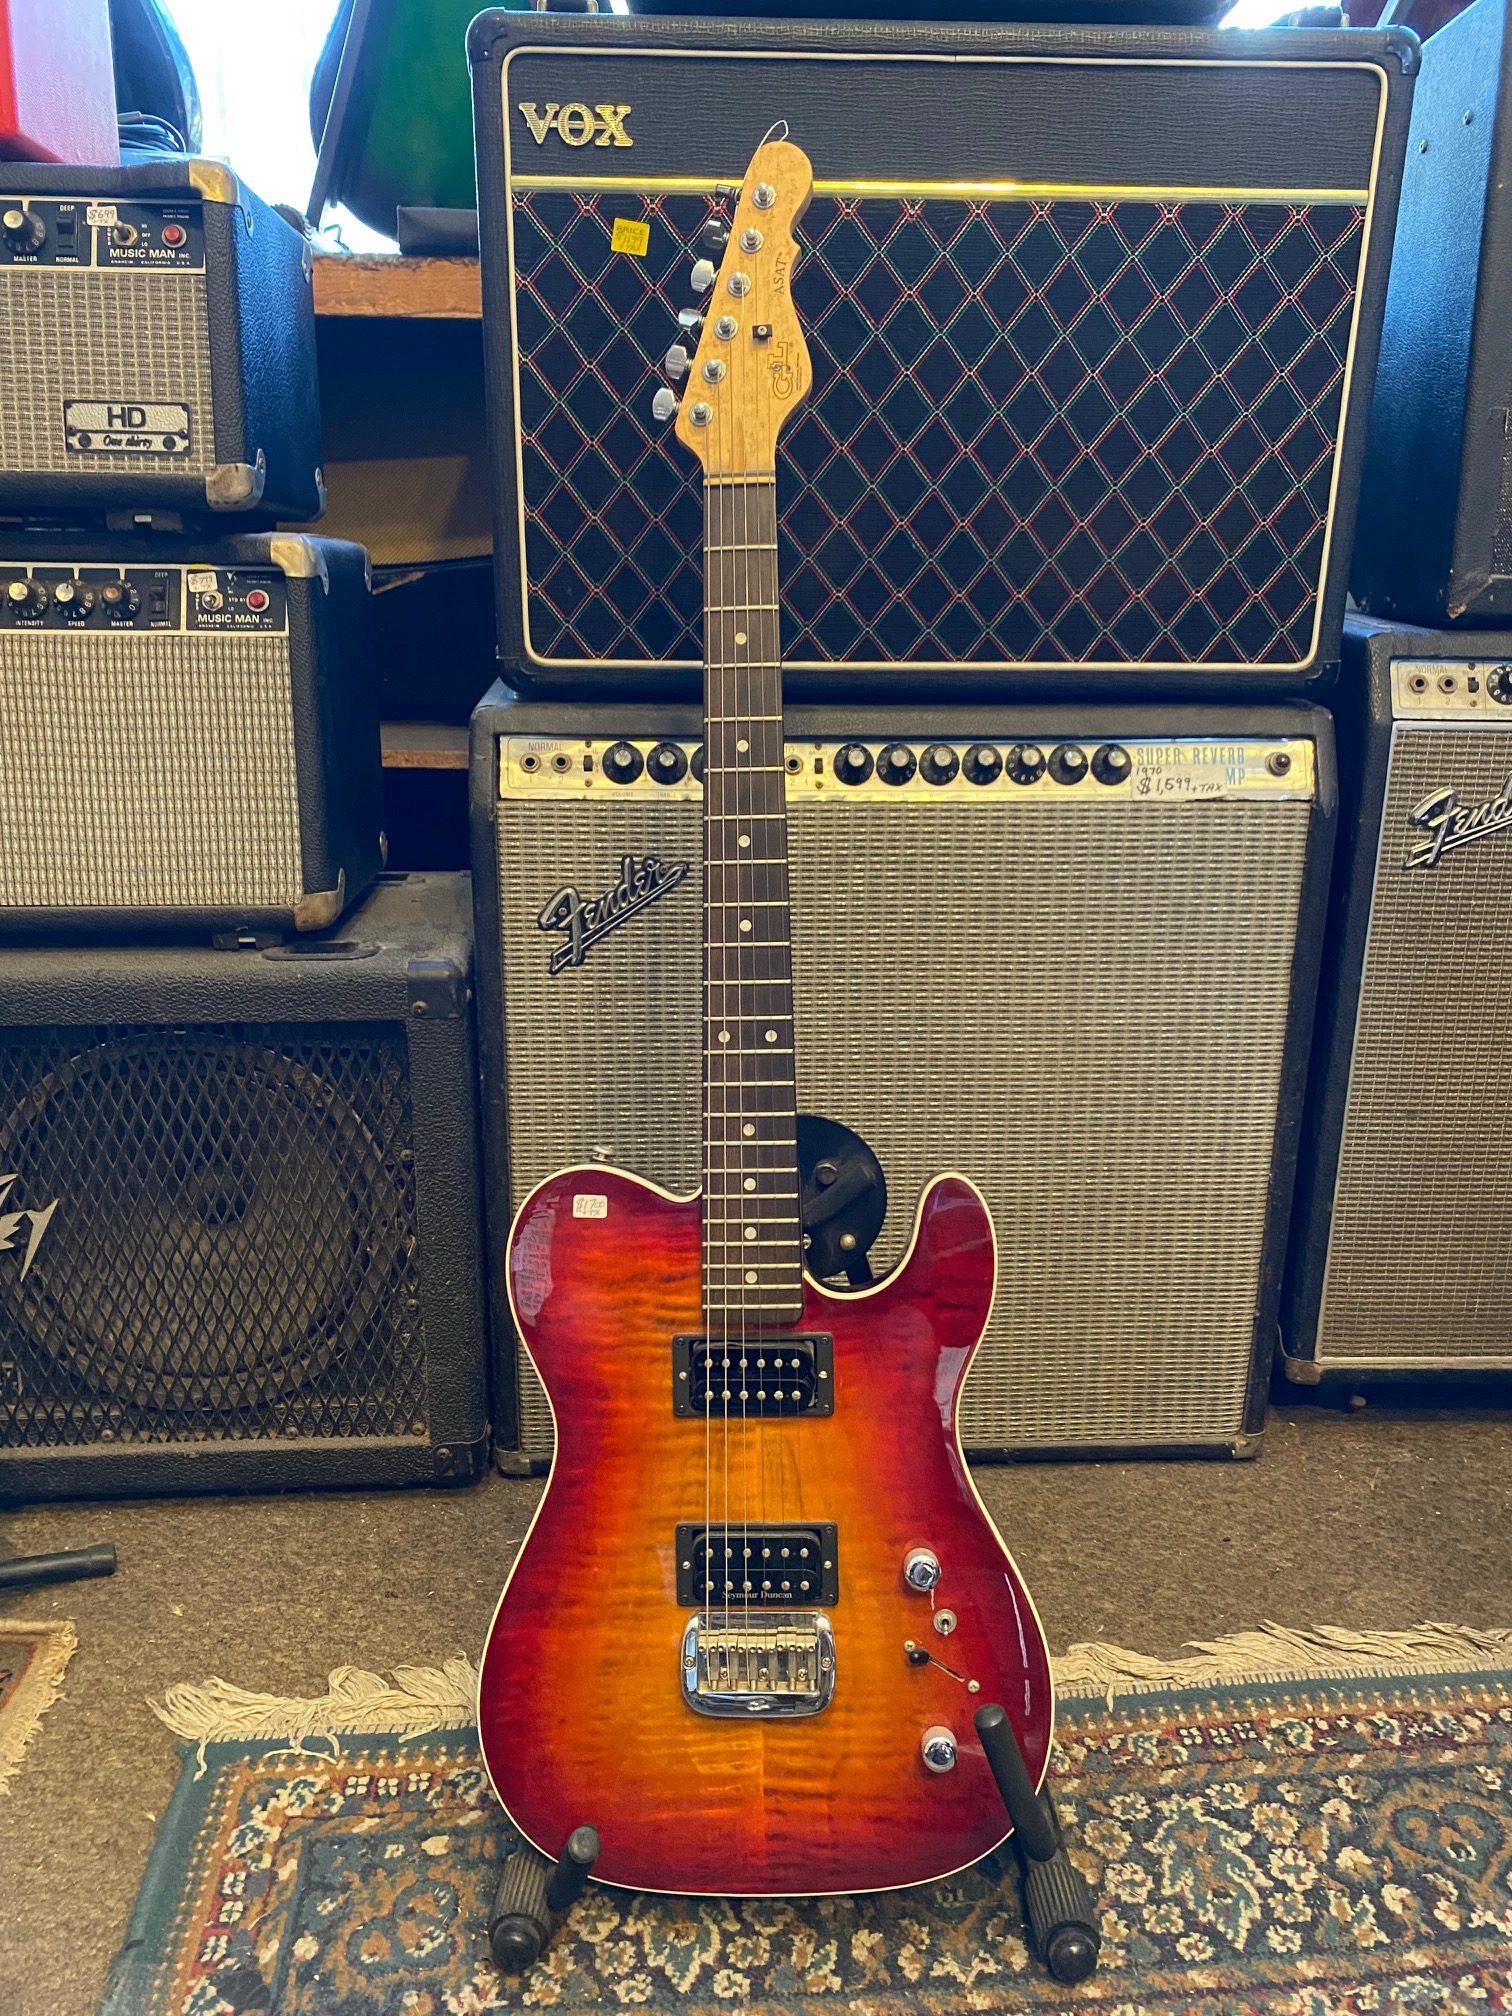 G&L ASAT: Mahogany Body FLAME TOP Coil Tap 10.0 $1700 w/ H.S. Case NOW $1,275